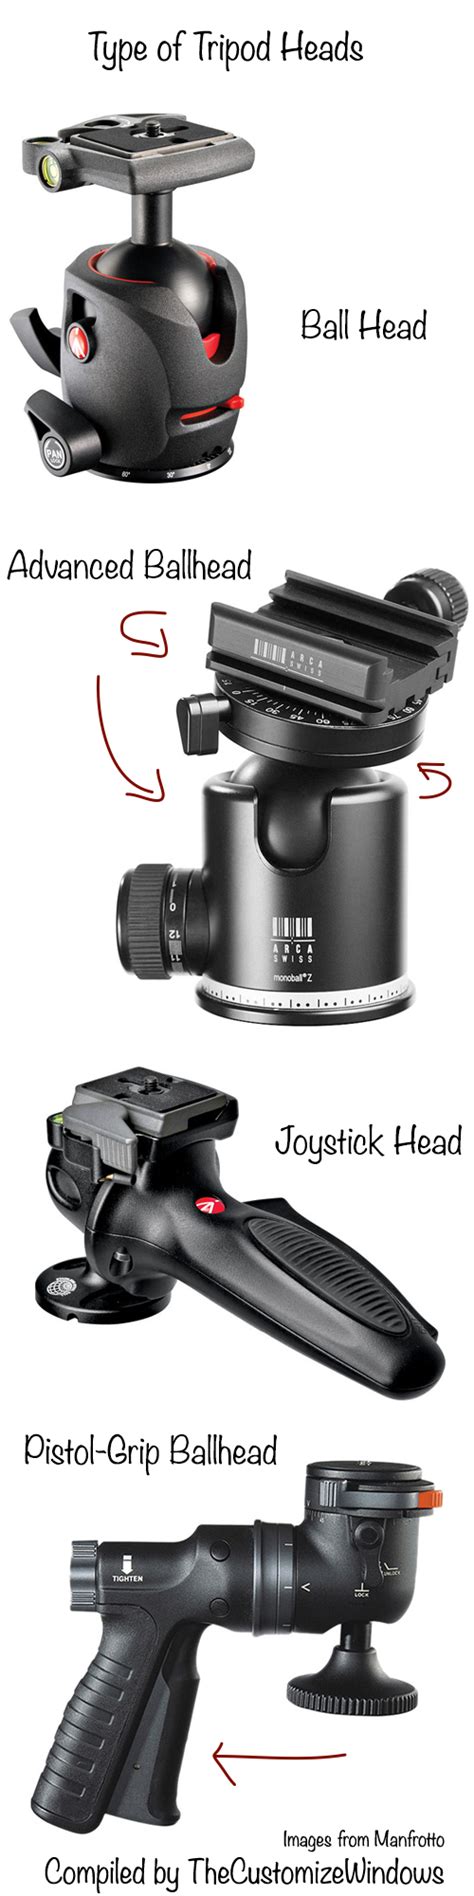 Tripod Head Details Types And Parts Of Tripod Head